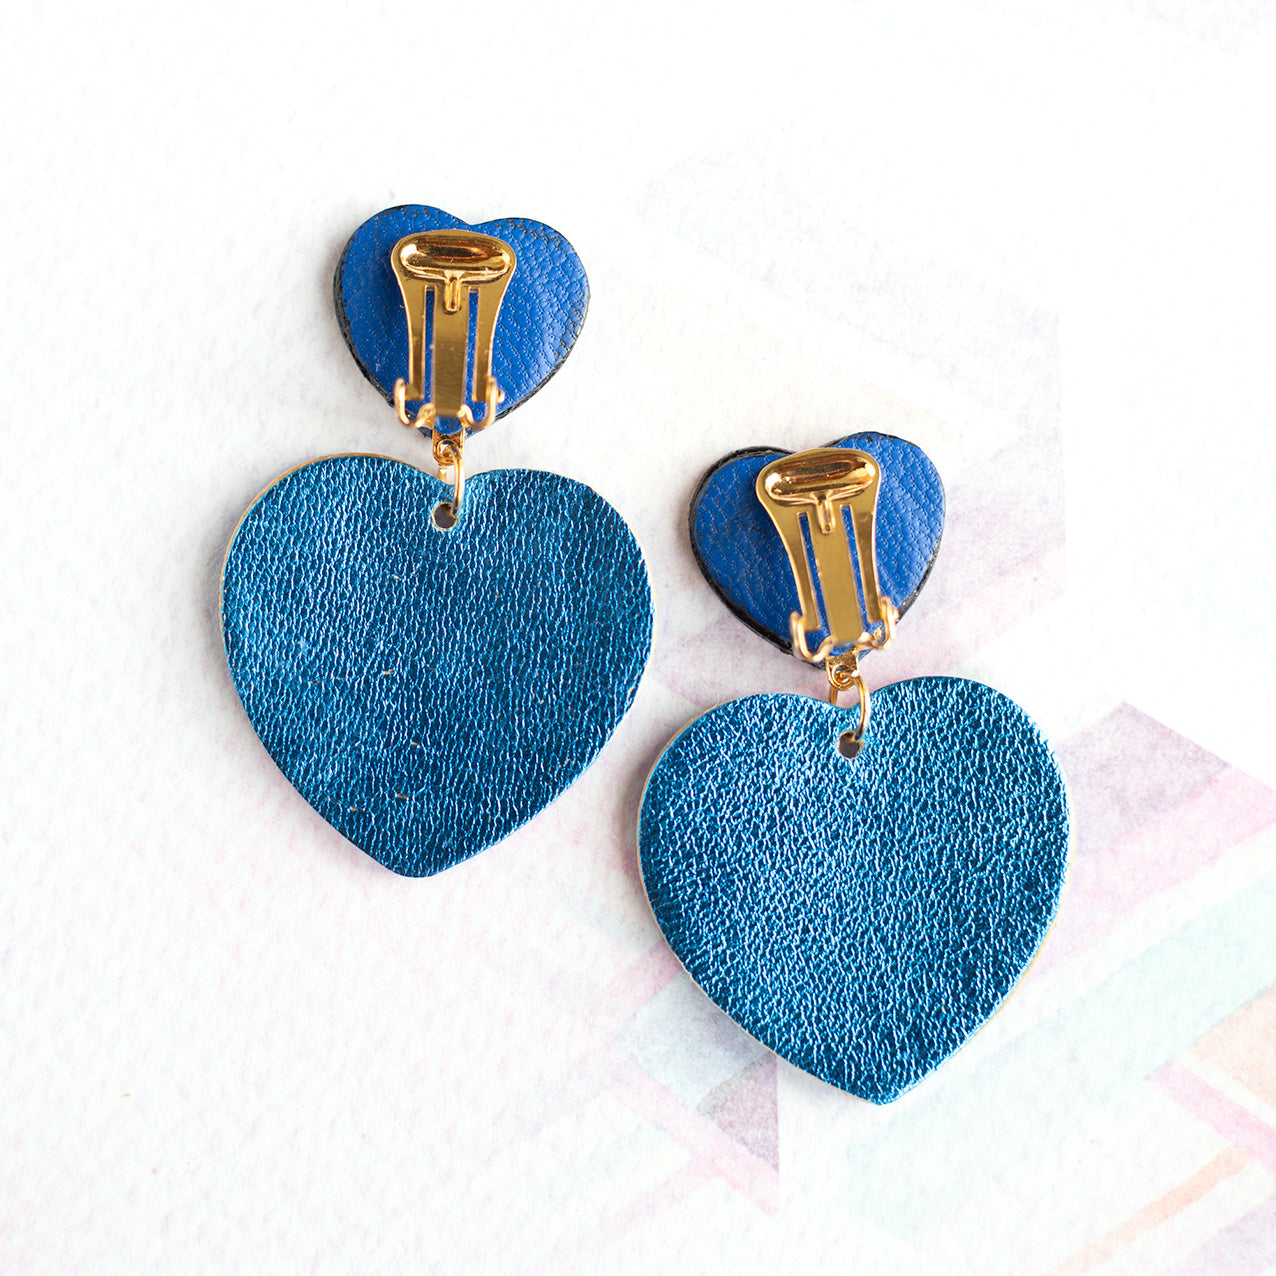 Double Hearts clip-on earrings - metallic blue and purple leather